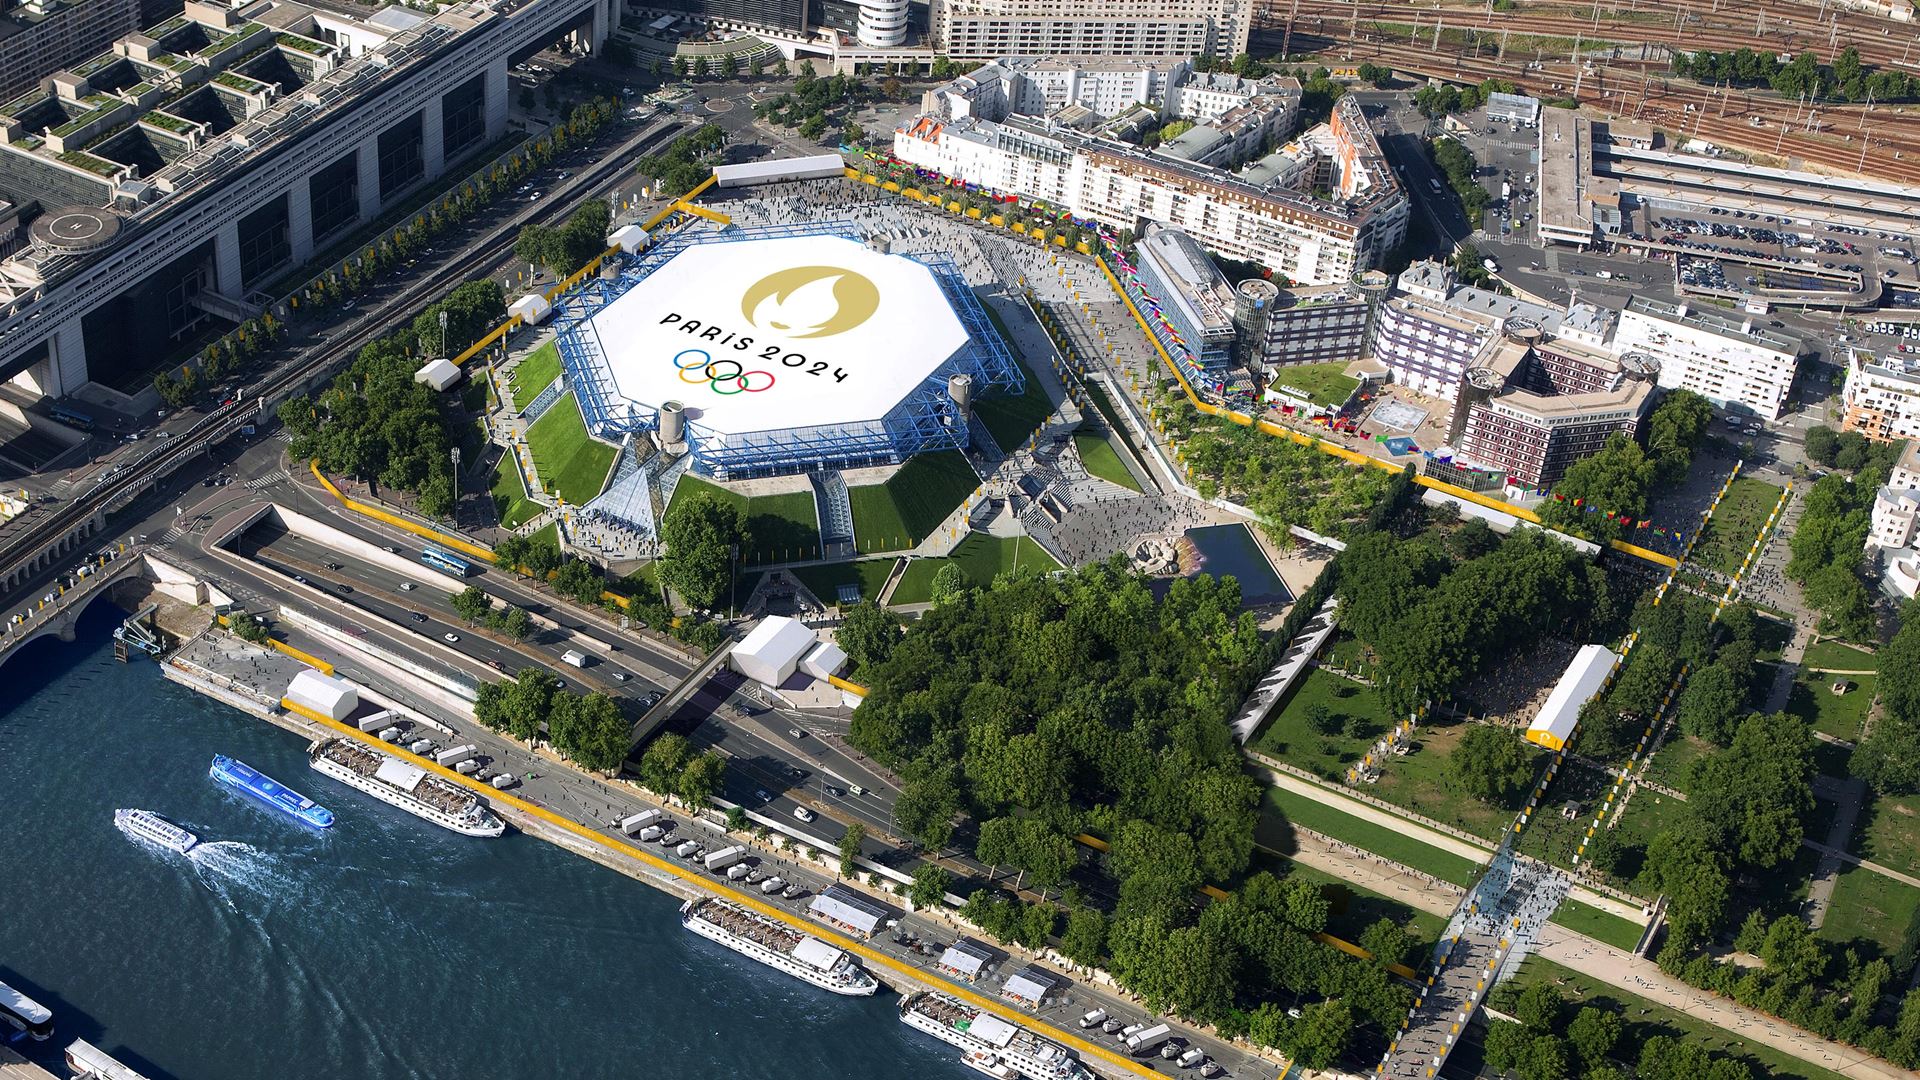 Paris 2024 unveils key dates for Olympic Games ticketing